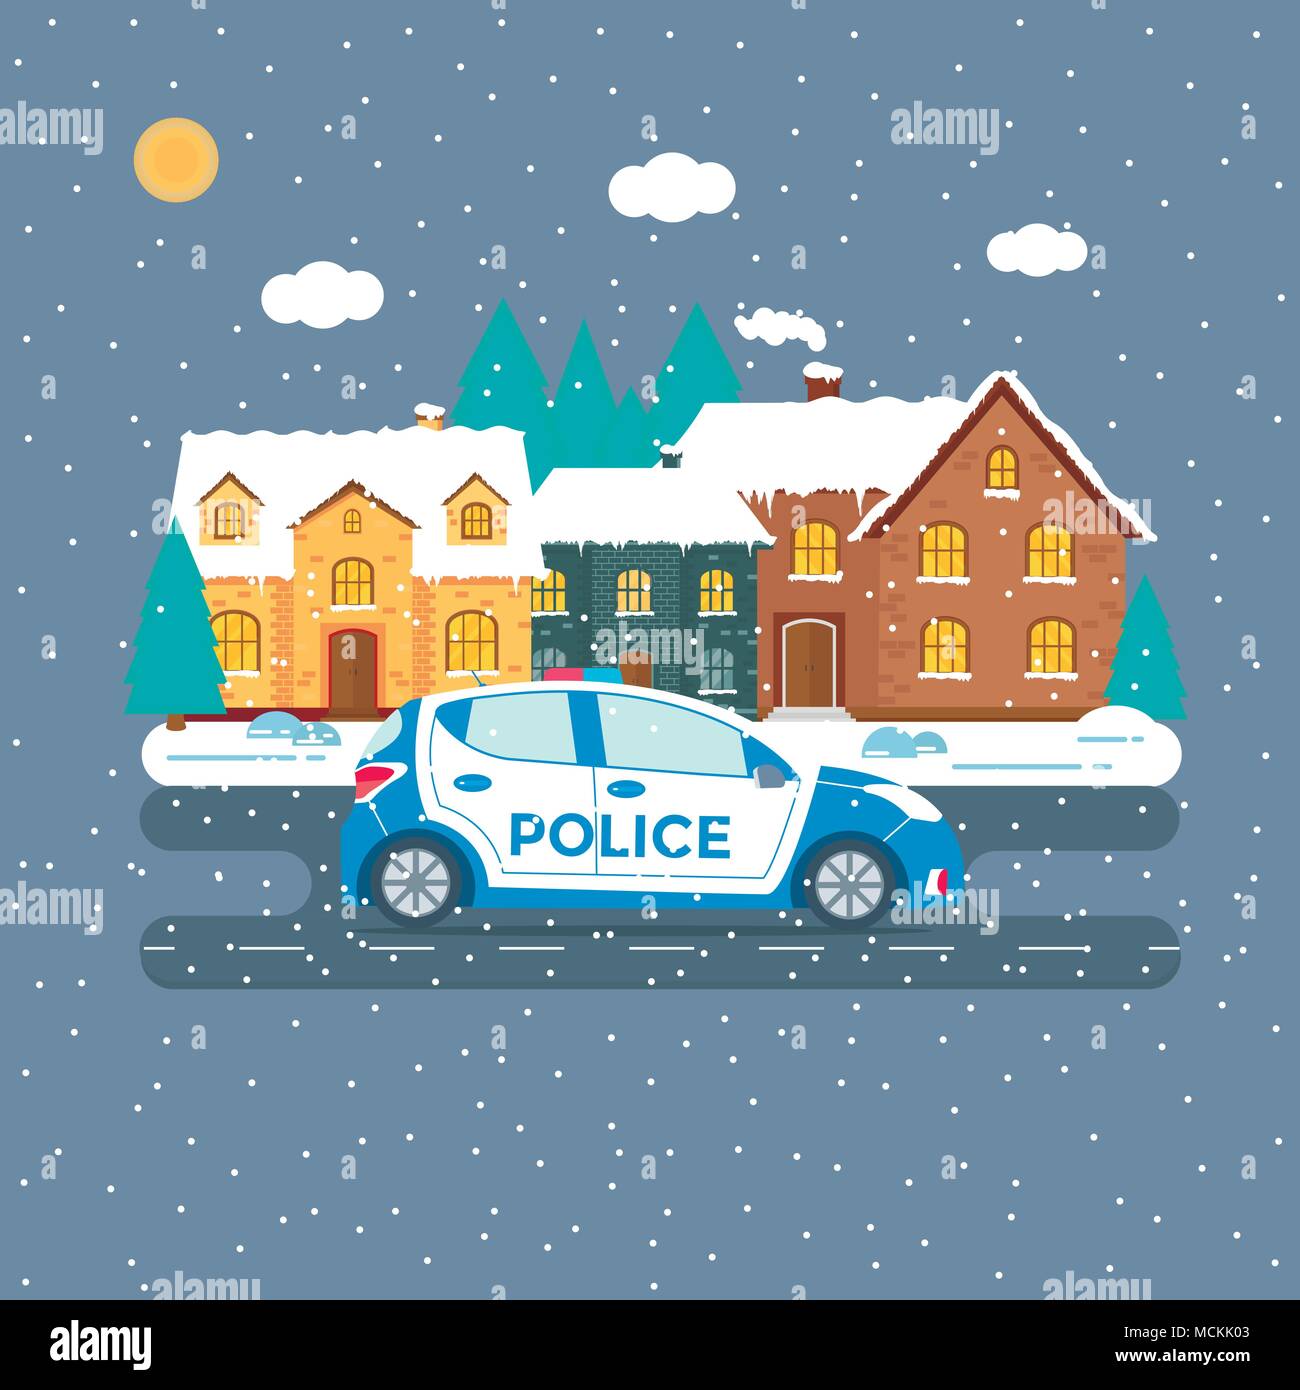 Police patrol on a road with police car, house, nature landscape. vehicle with rooftop flashing lights. Flat vector illustration. Stock Vector